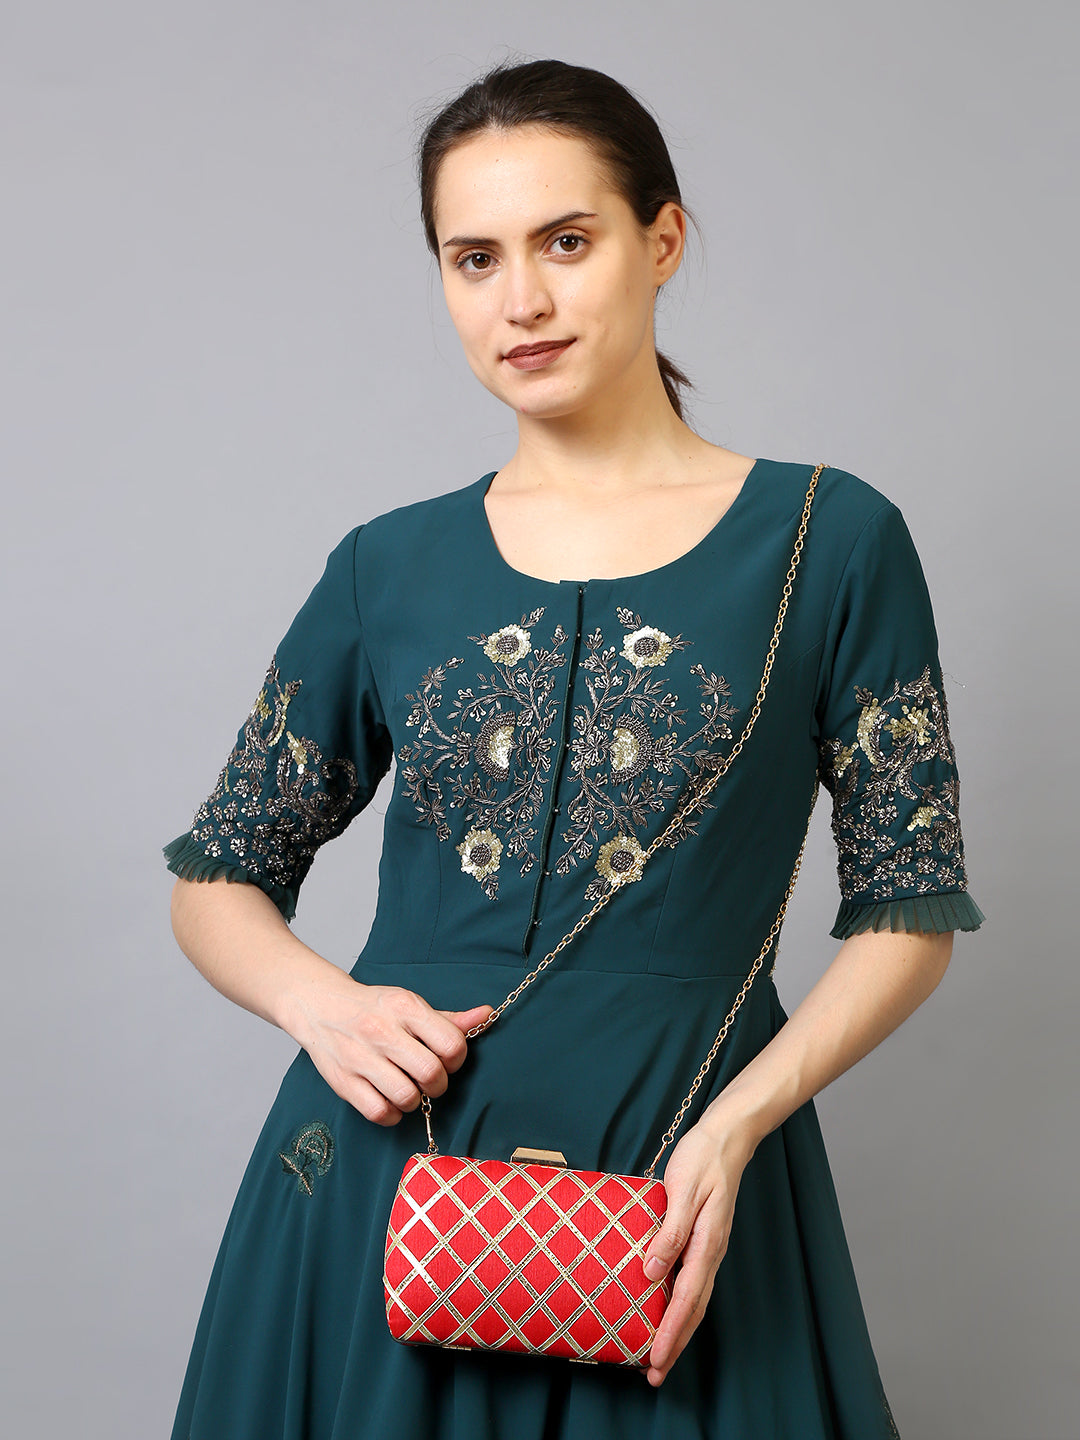 Filauri Cross Pattern Structured Sling Bag Red